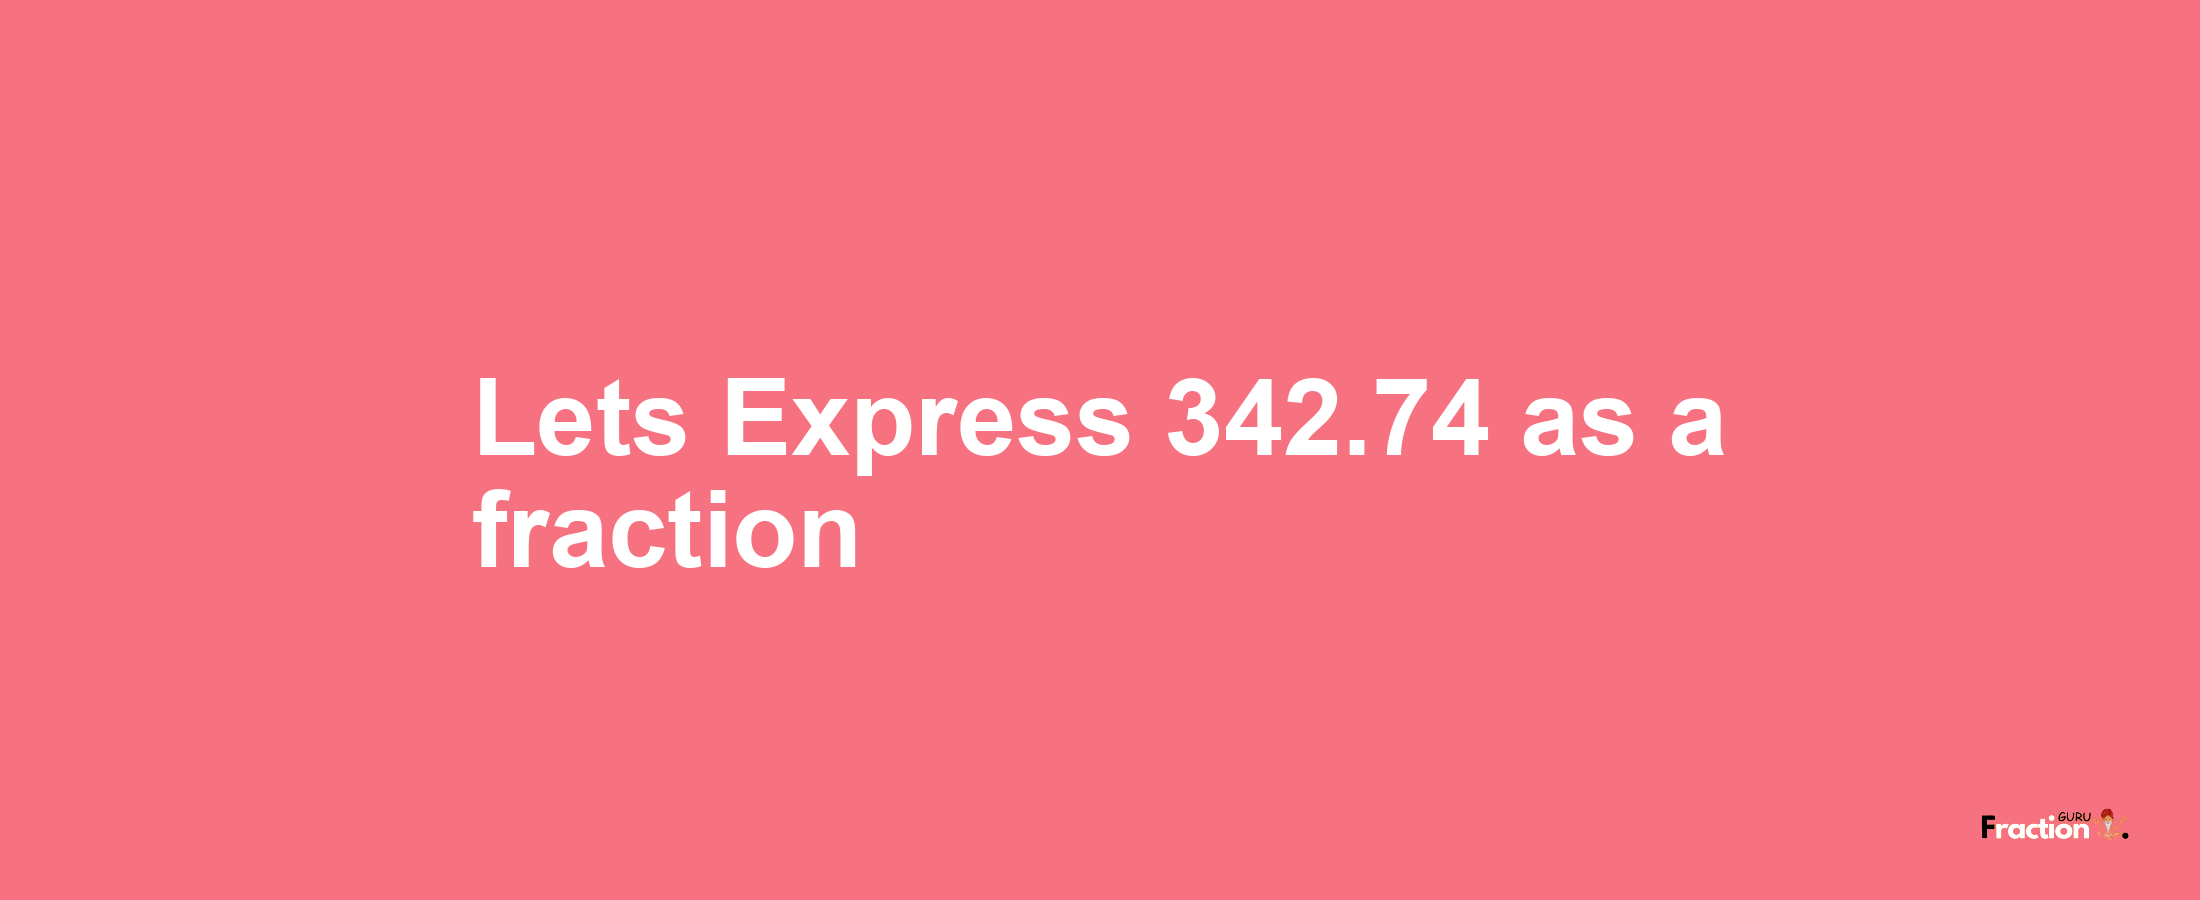 Lets Express 342.74 as afraction